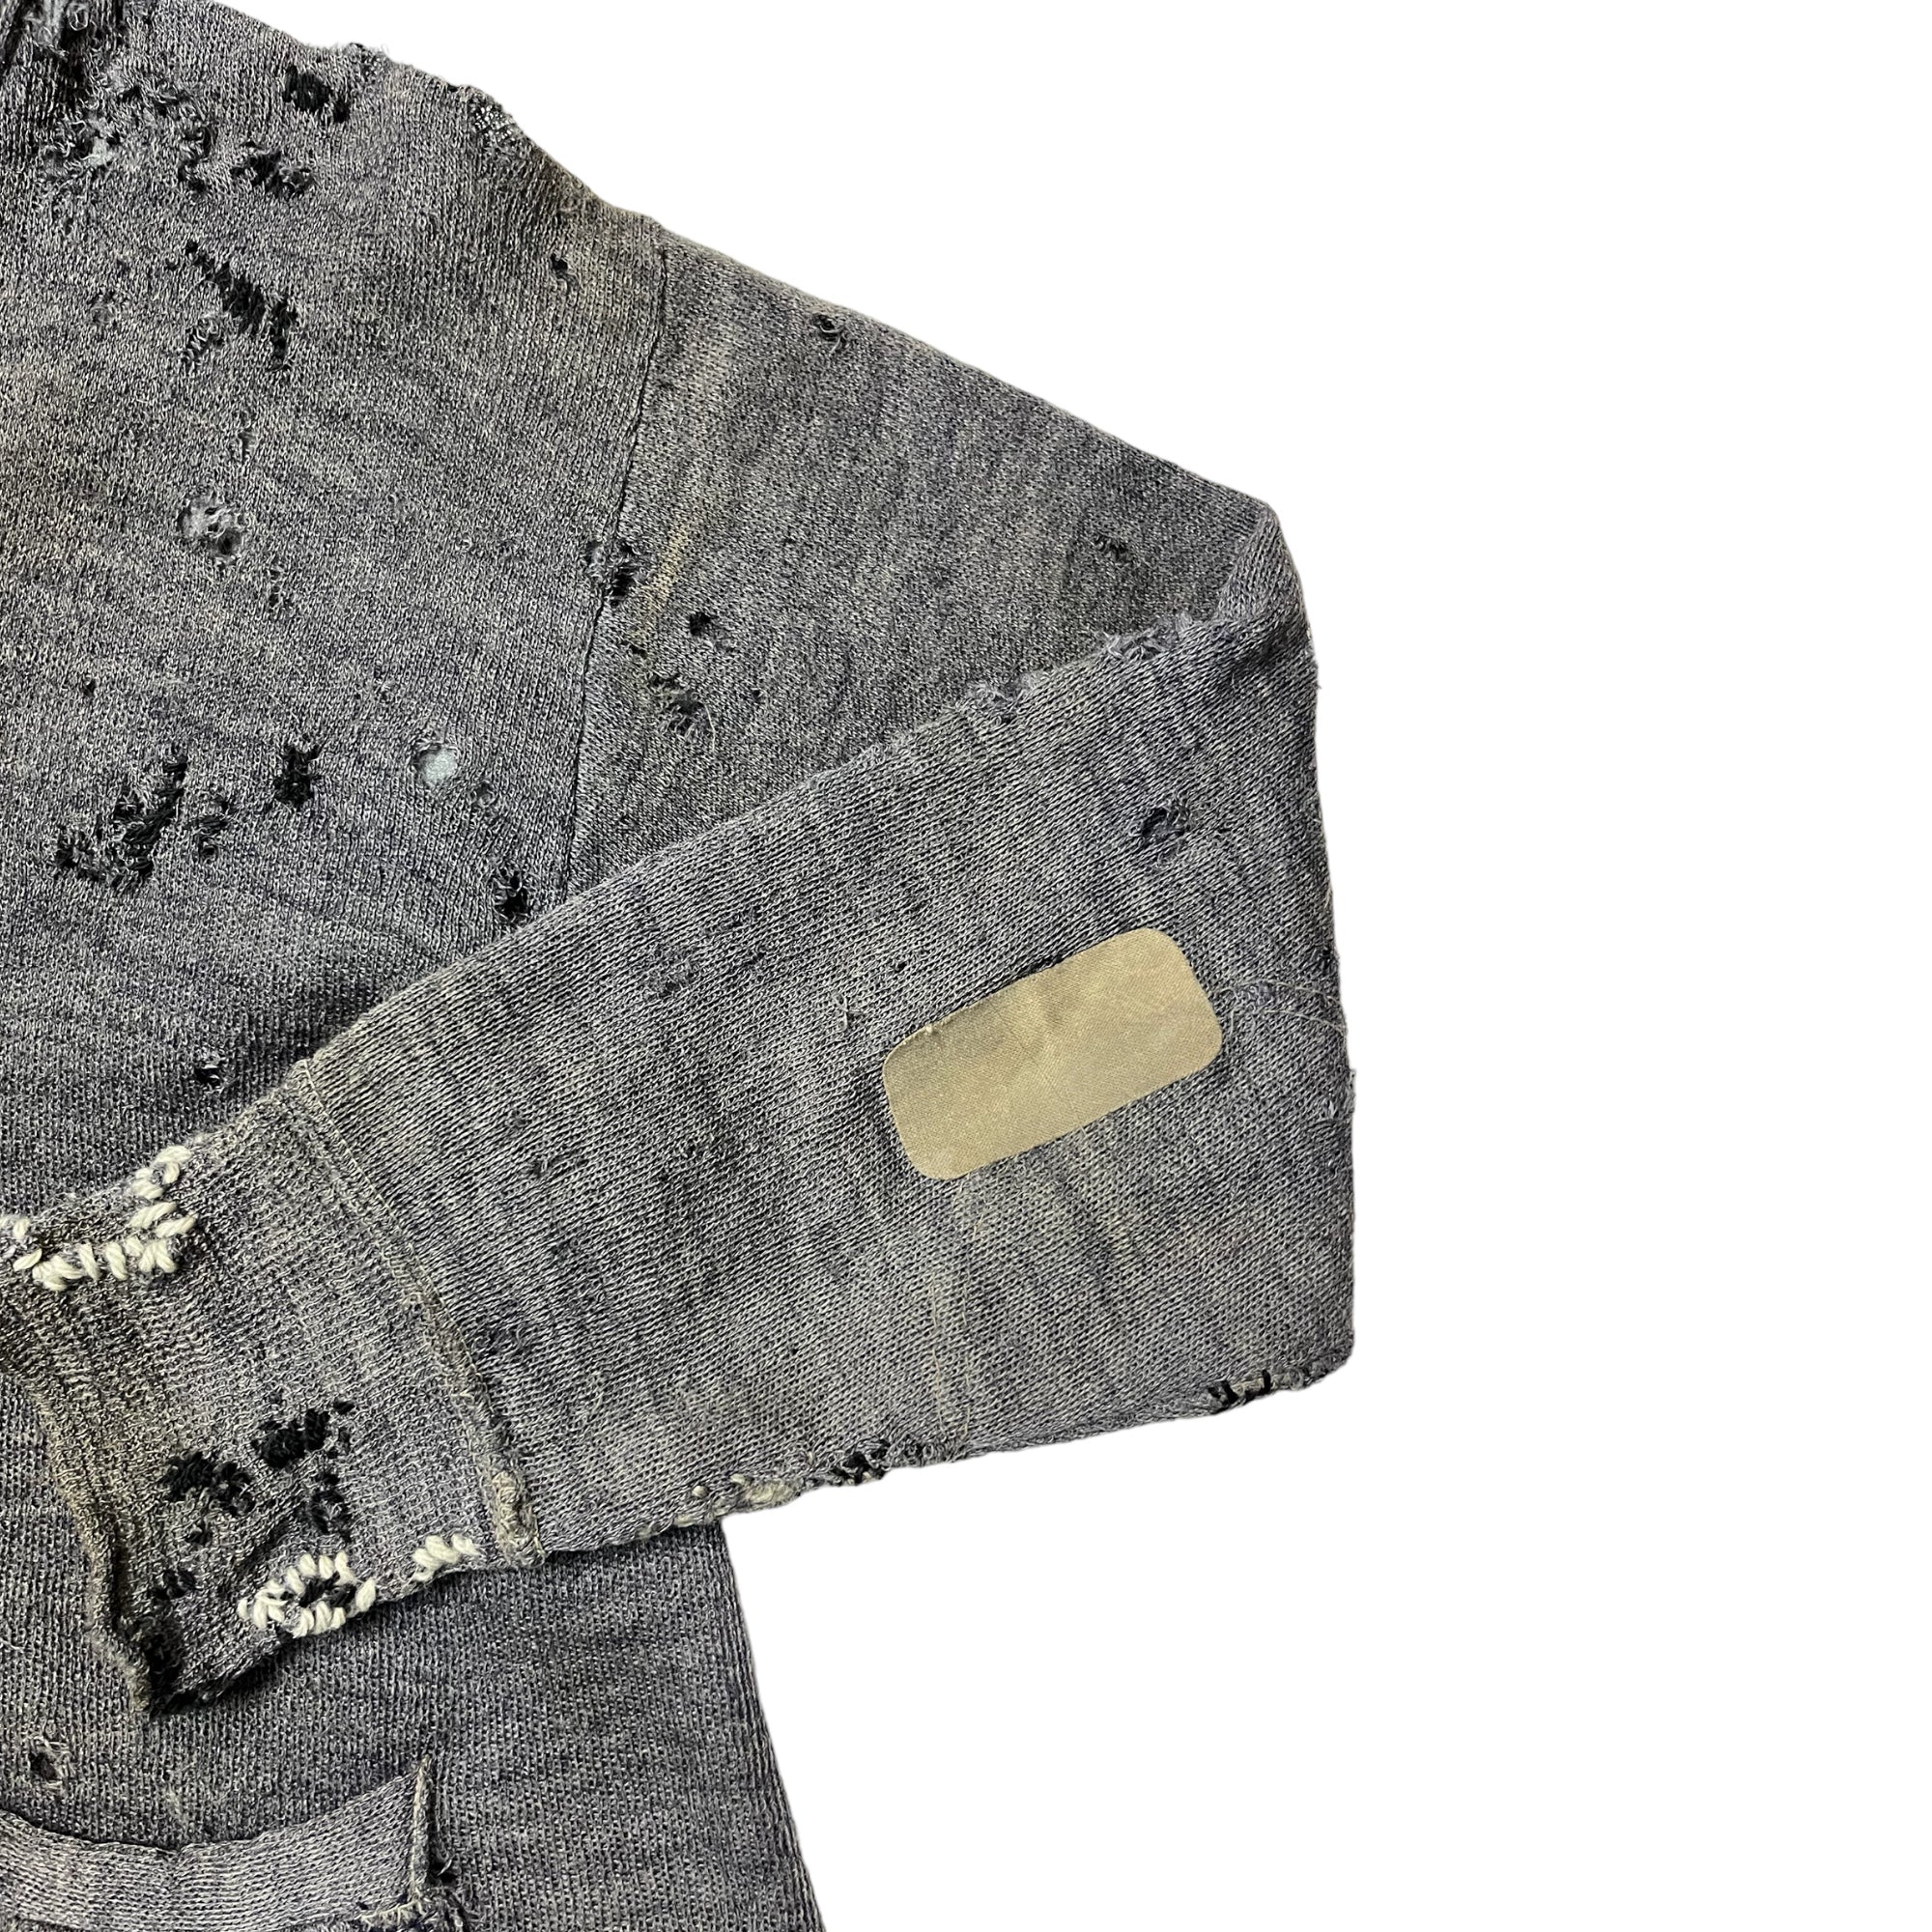 1950s Distressed Wool Cardigan With Extensive Repairs and Darning - Stone Grey - S